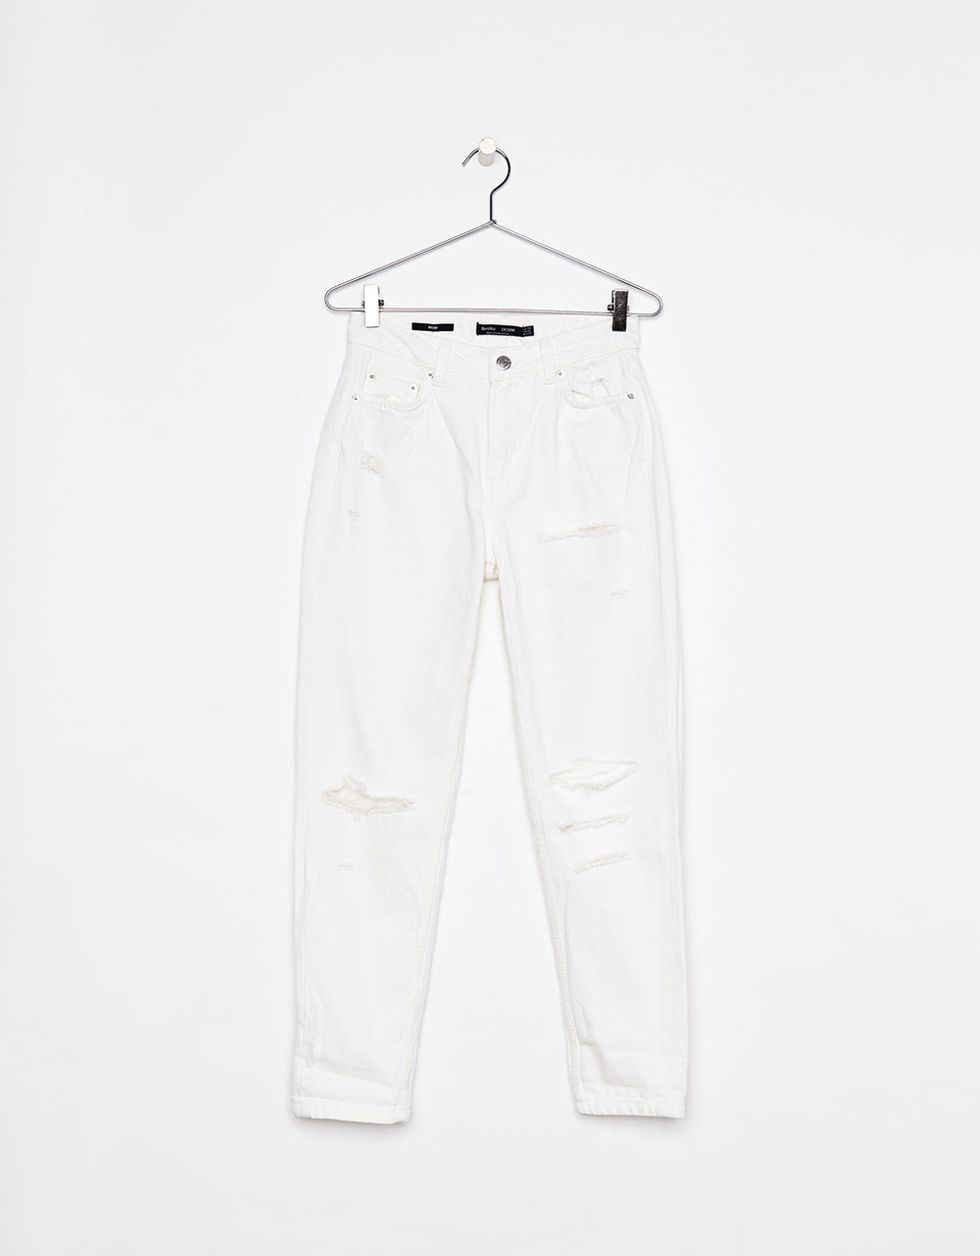 White, Clothing, Trousers, Active pants, Jeans, Sleeve, Sportswear, Denim, Clothes hanger, 